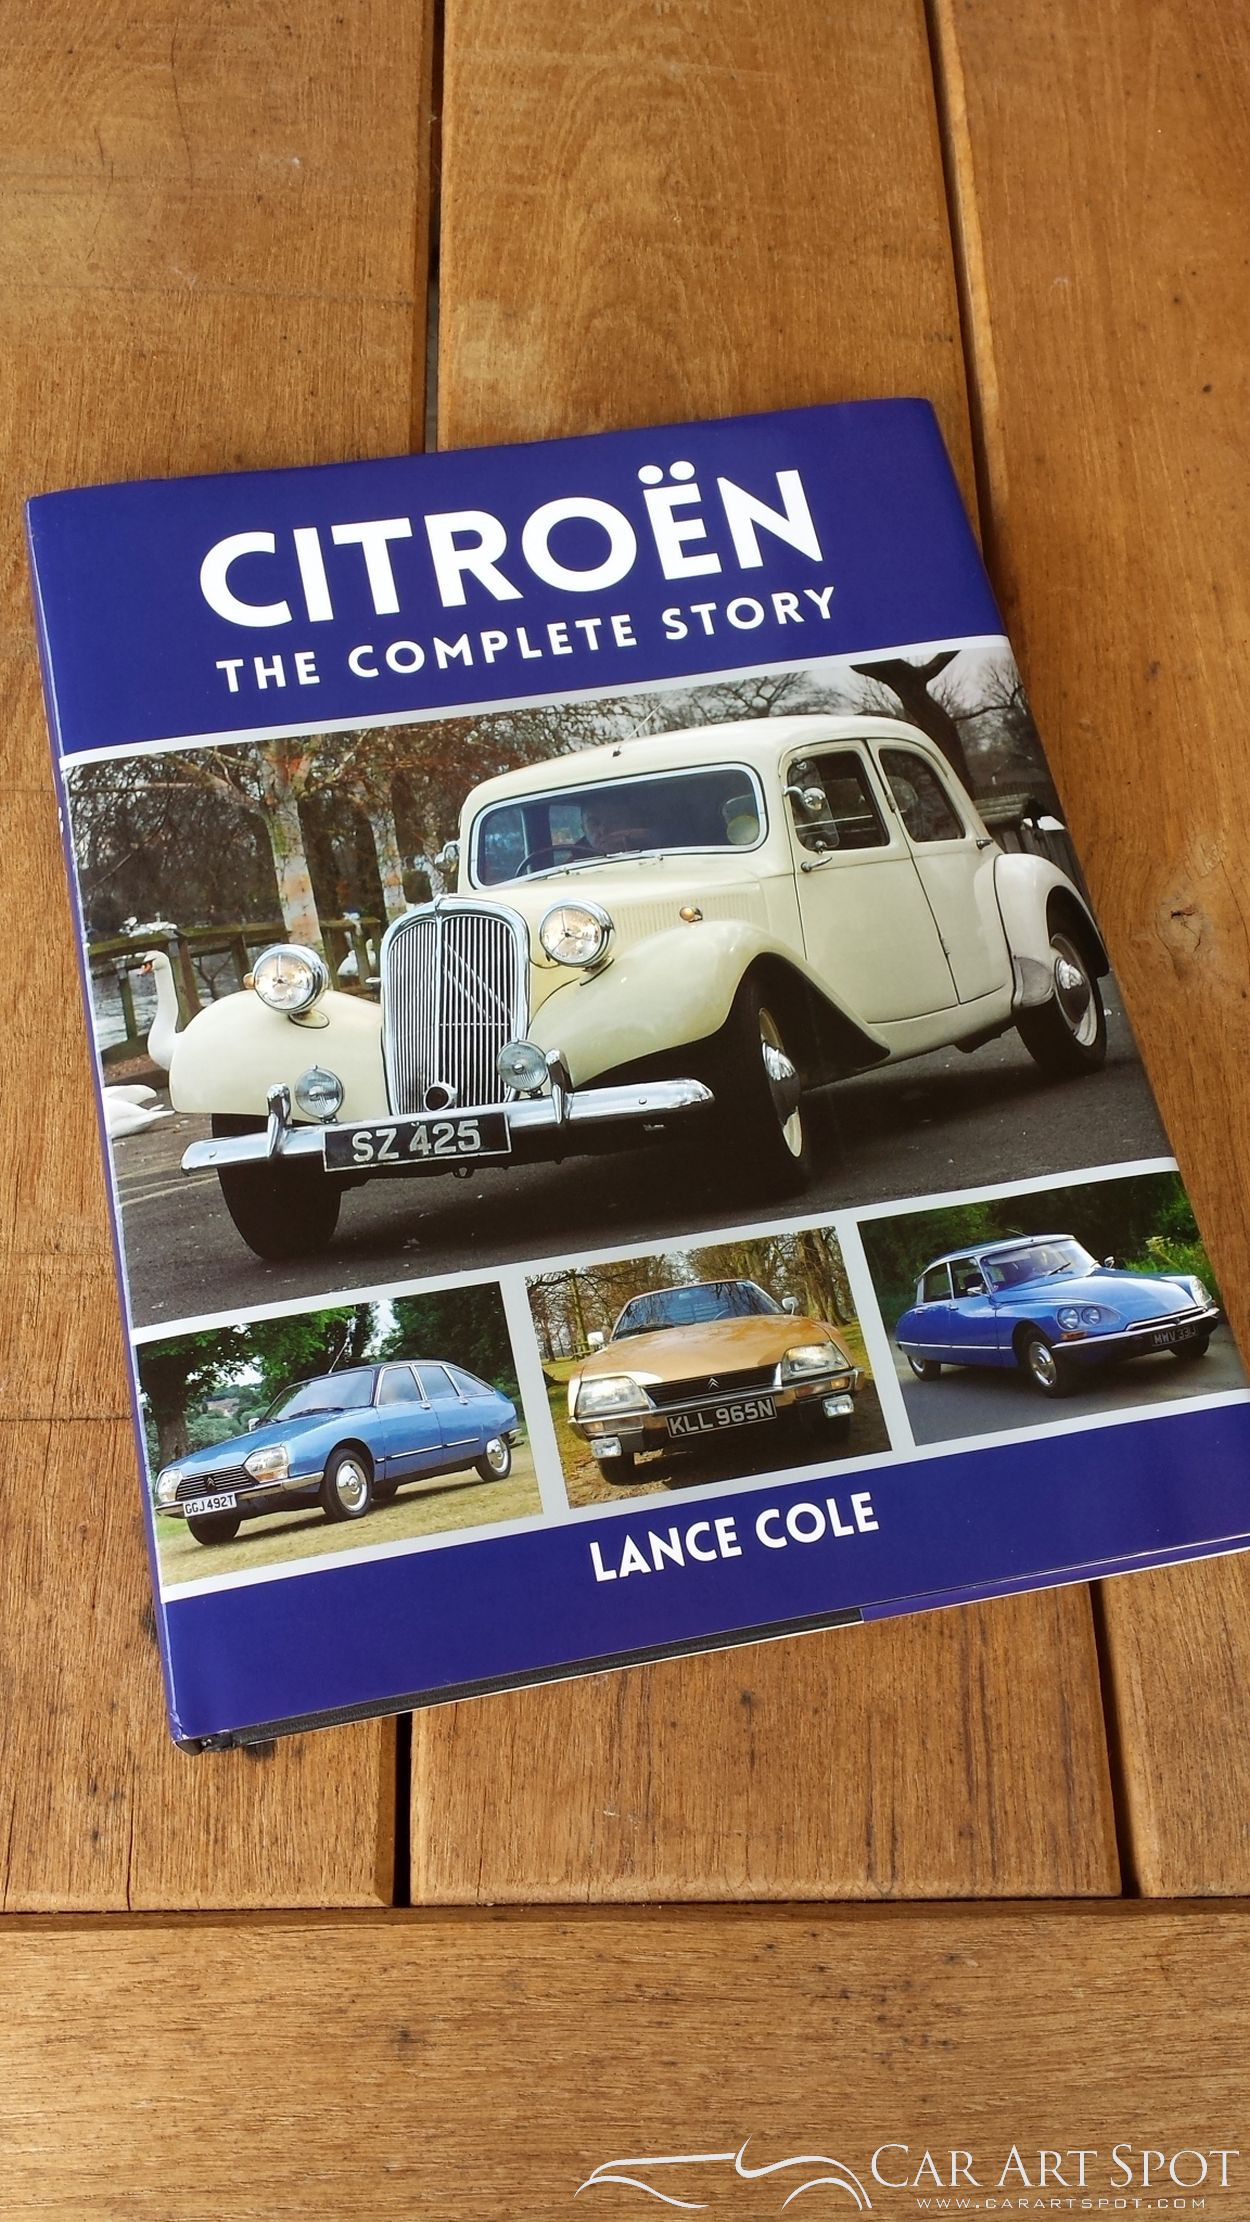 Citroen The complete story